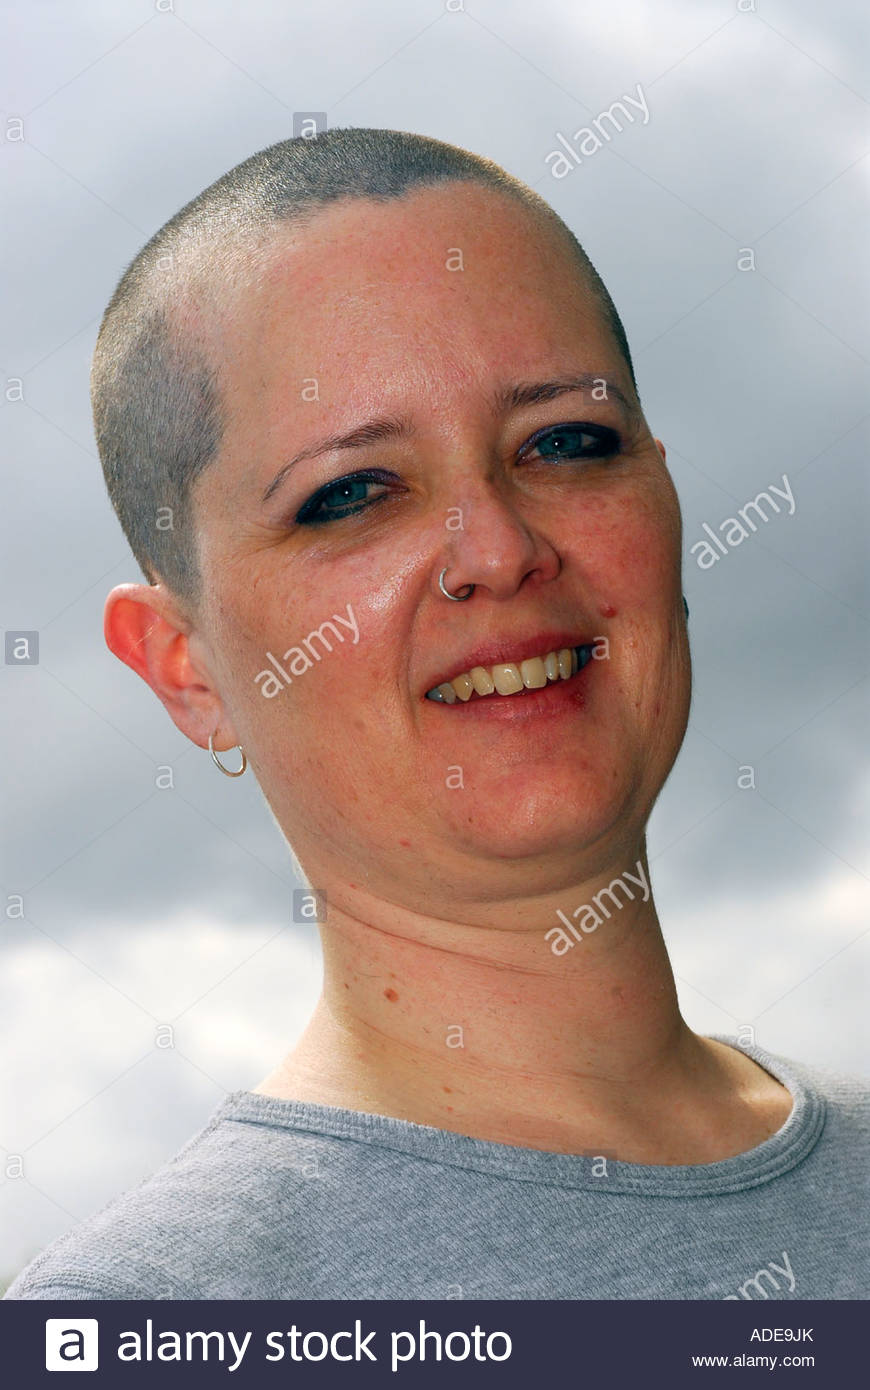 Roma reccomend From head picture shaved woman